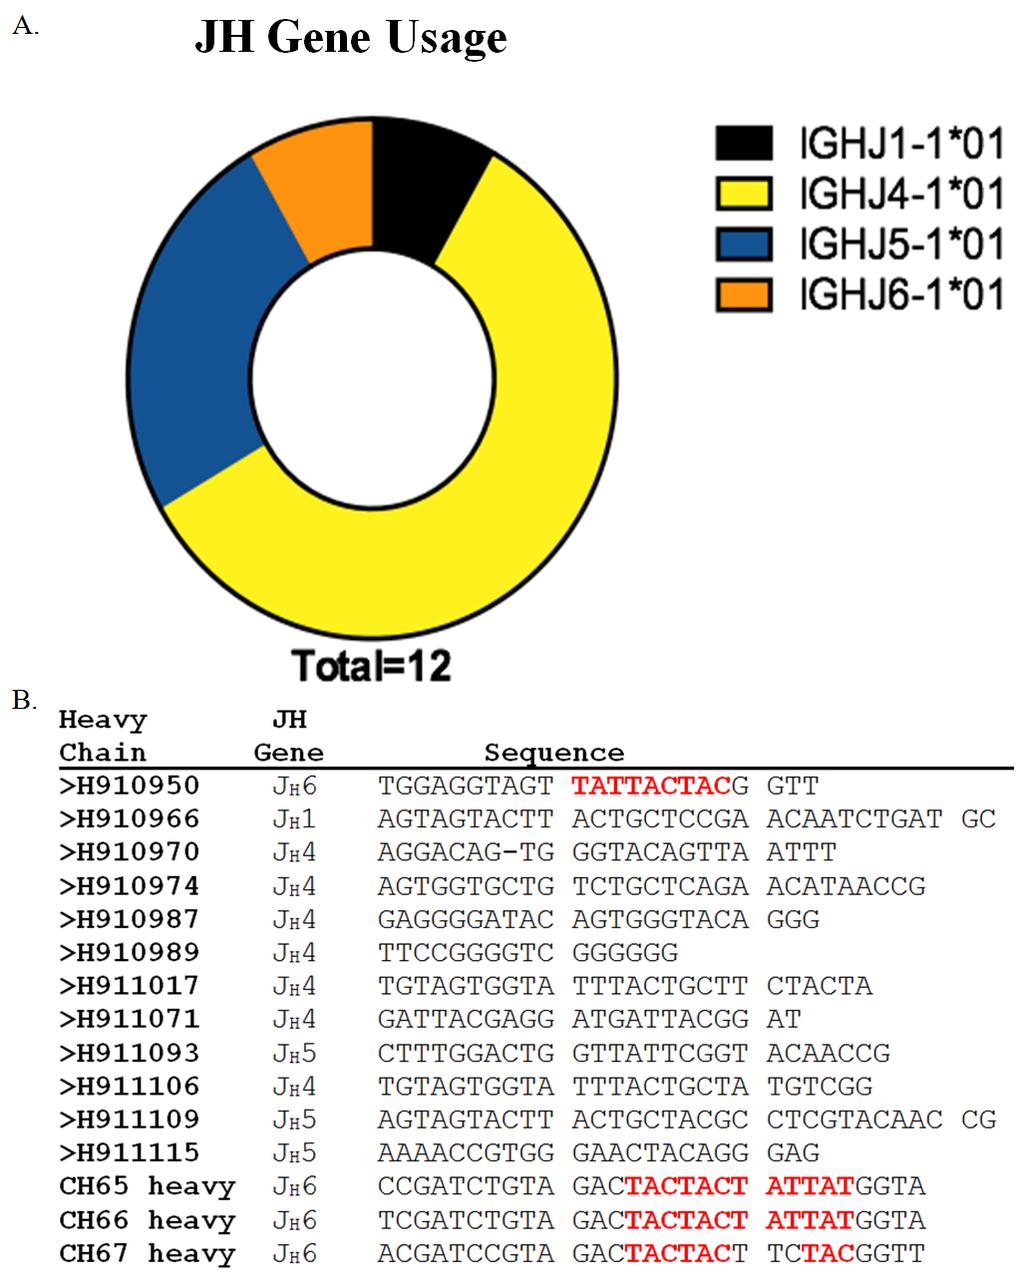 Figure 10: JH gene usage for influenza specific antibodies isolated from 144-05. (A) Antibody JH gene usage differentiated based on colors.